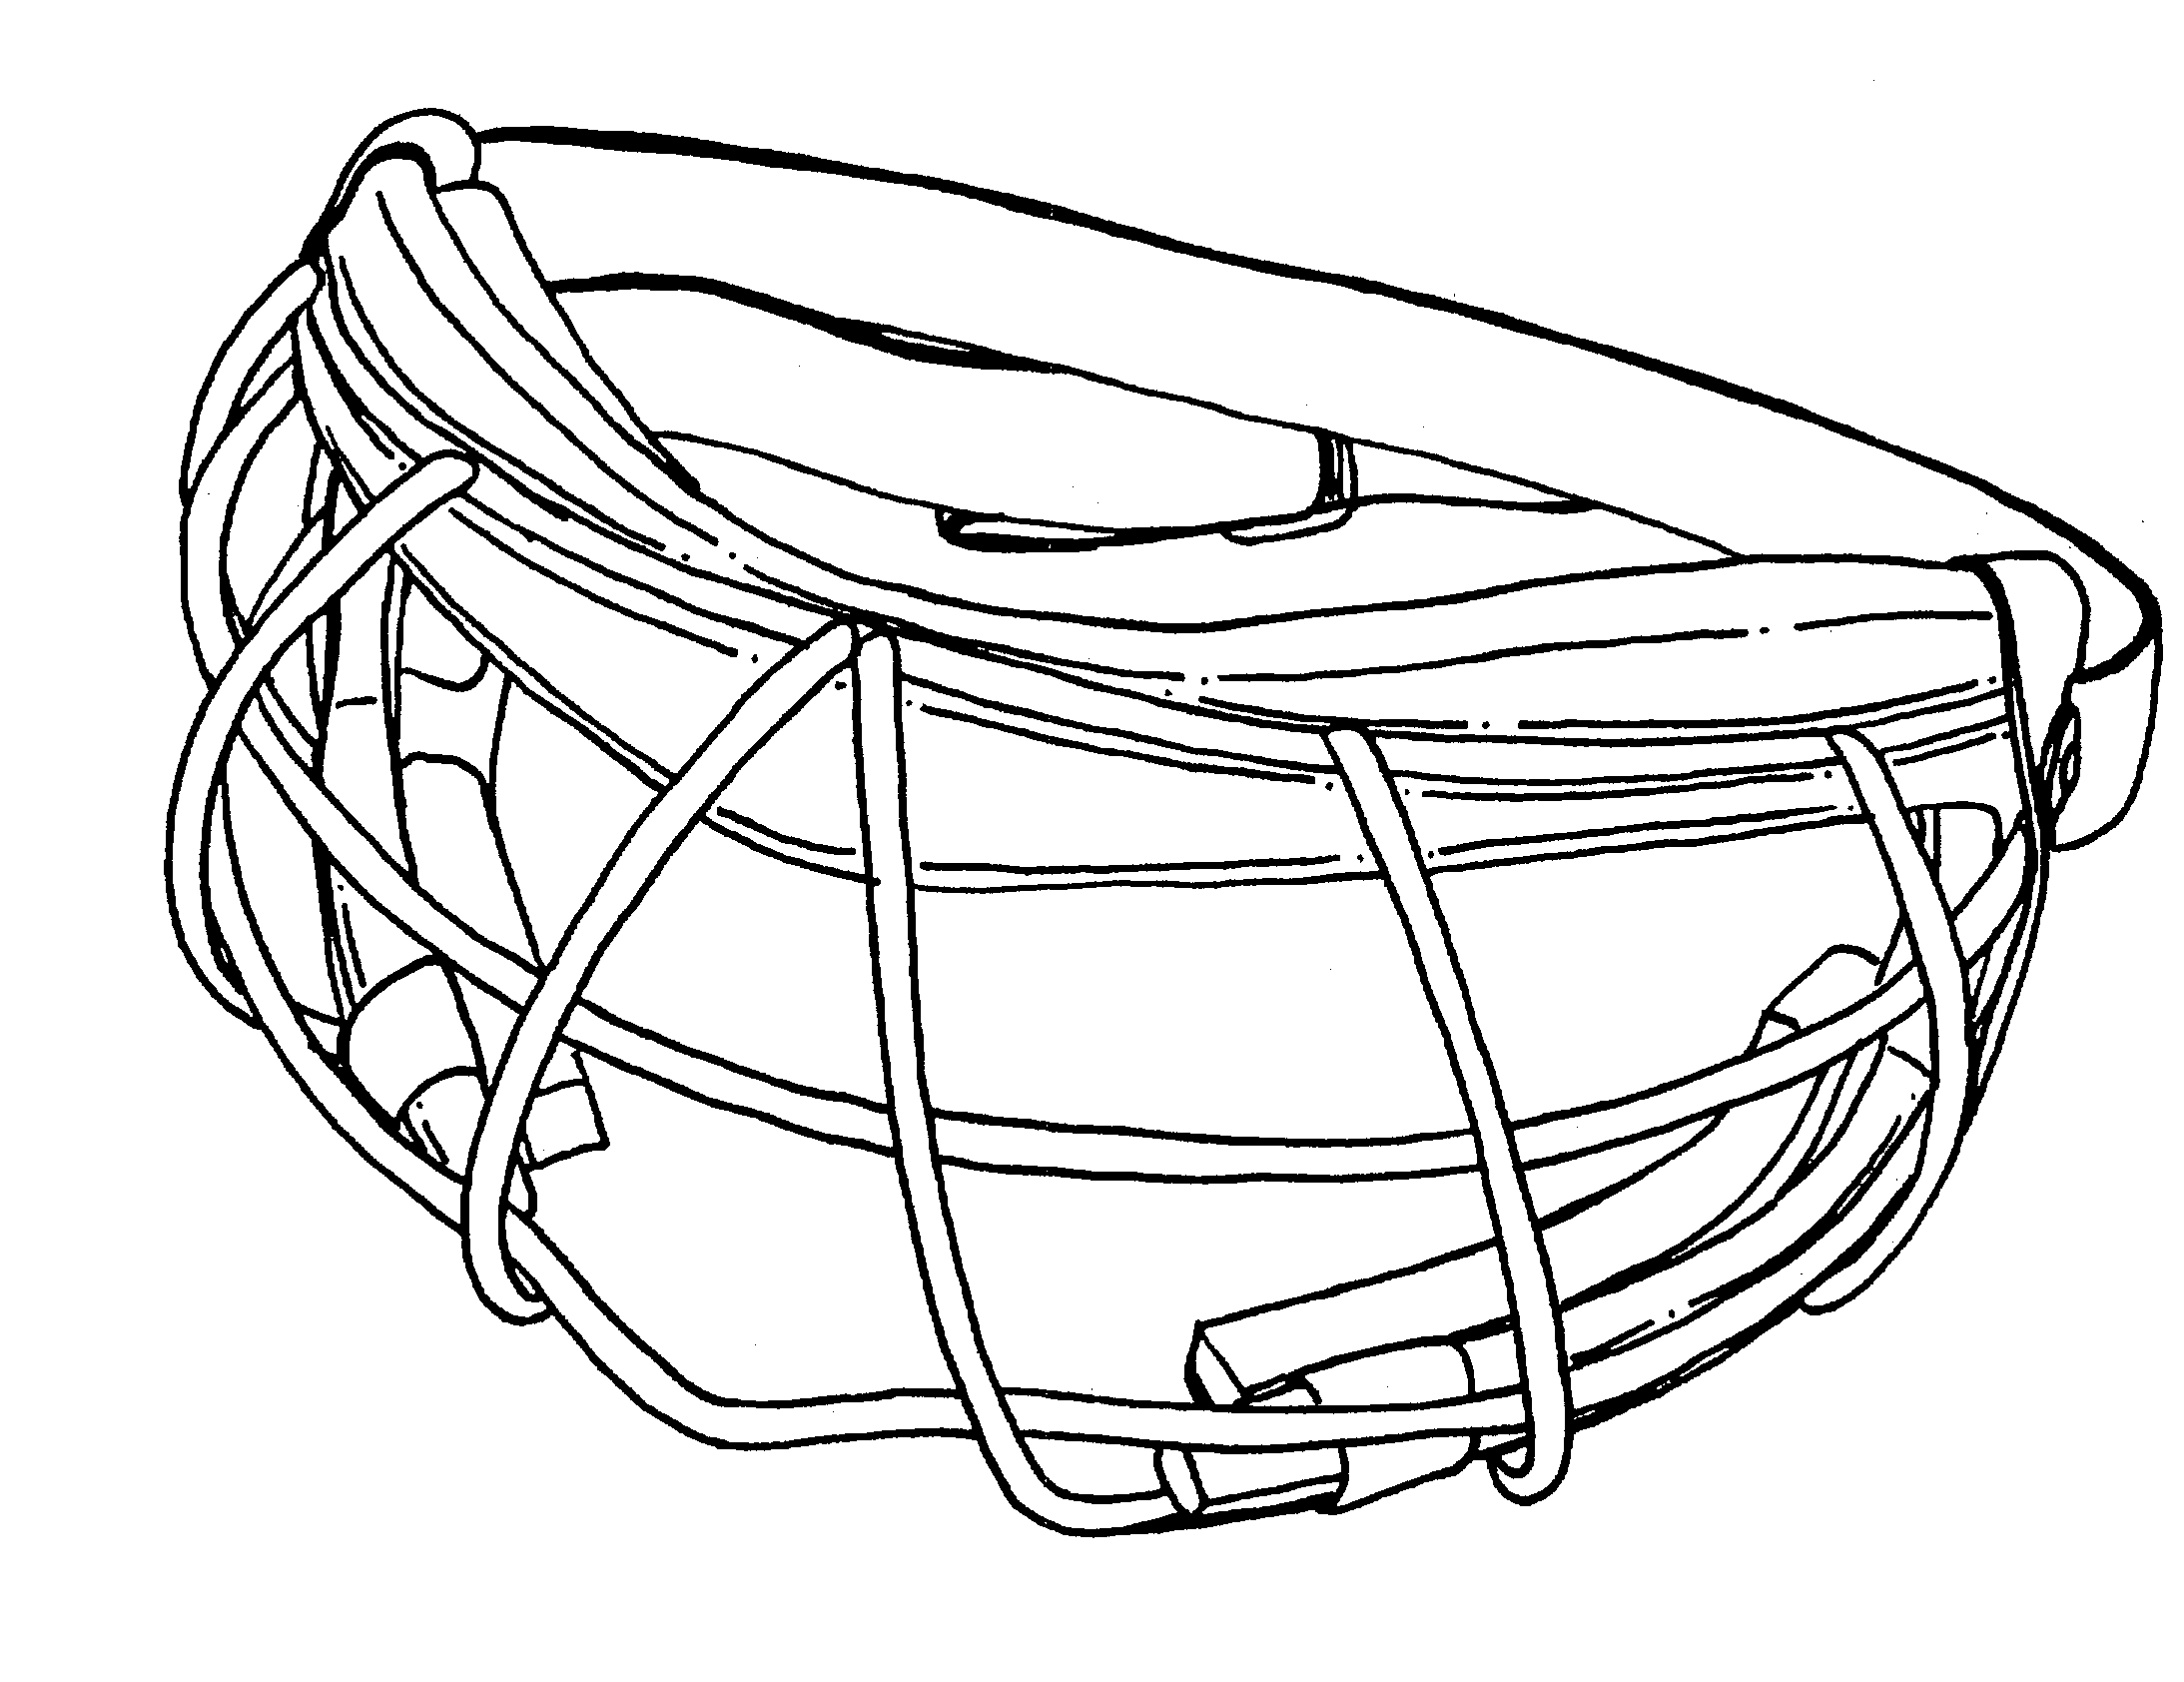 Protective eyewear device for sports